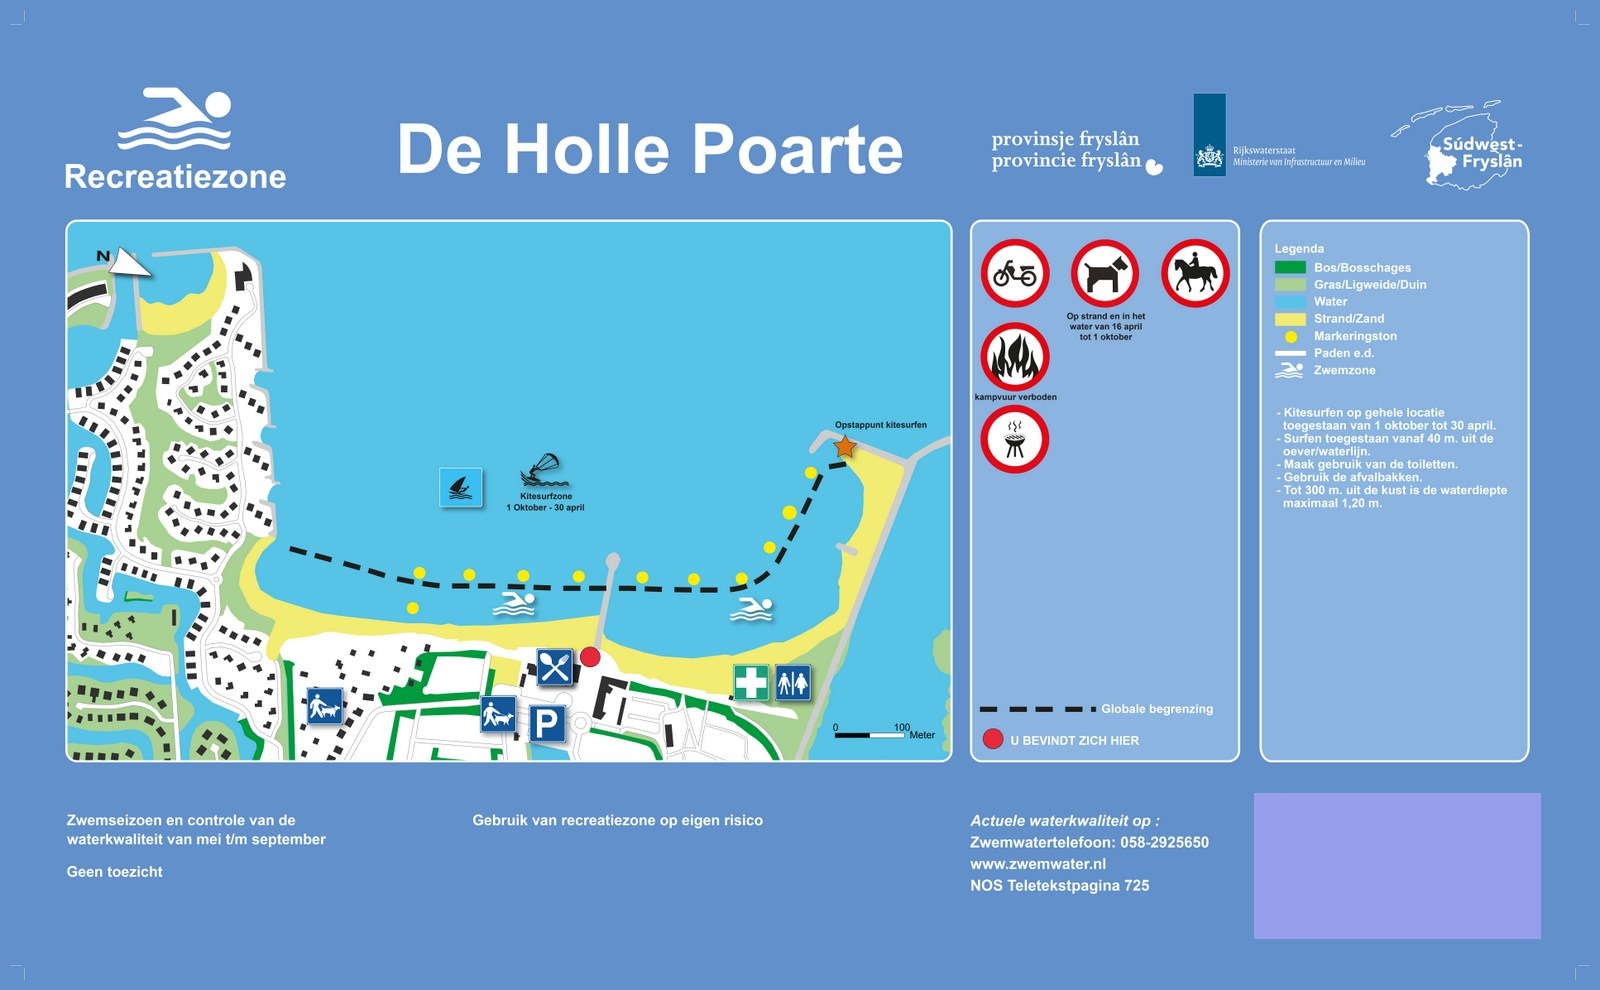 The information board at the swimming location De Holle Poarte